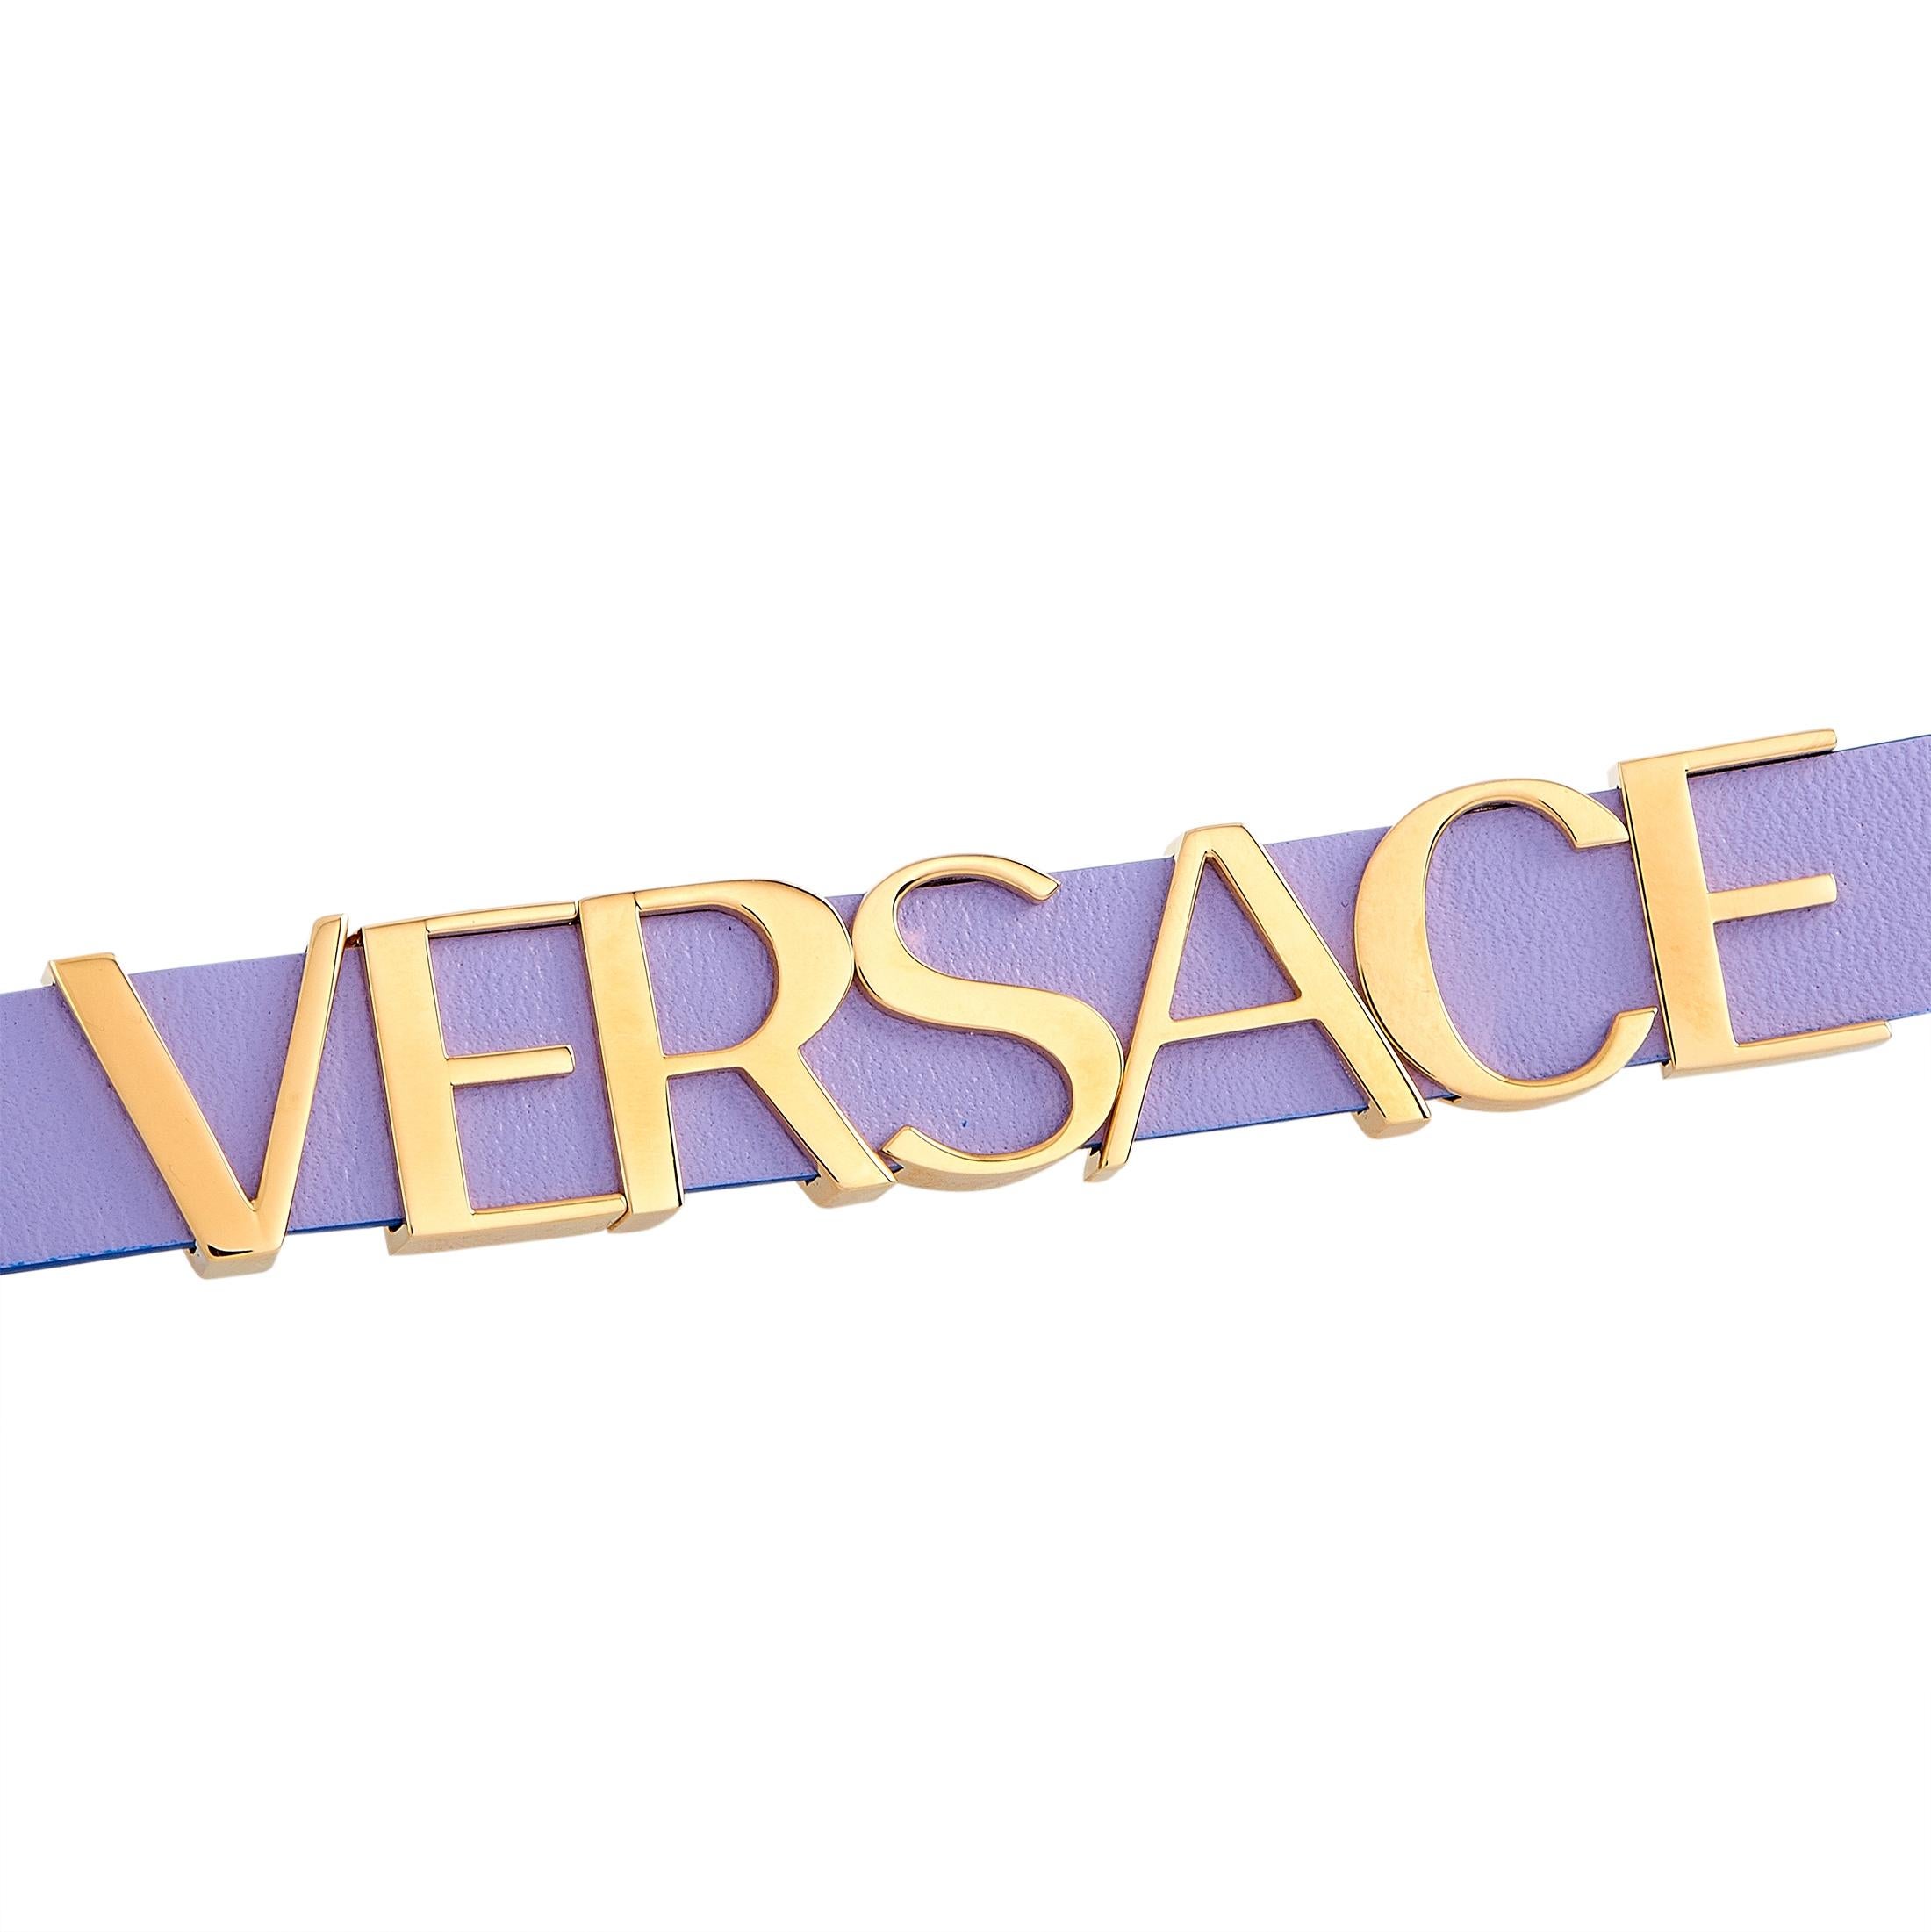 The Versace V-Flare watch, reference number VEBN00318, comes with a 28 mm stainless steel case that offers water resistance of 30 meters. The case is presented on a lilac leather strap fitted with a tang buckle. The watch is powered by a quartz